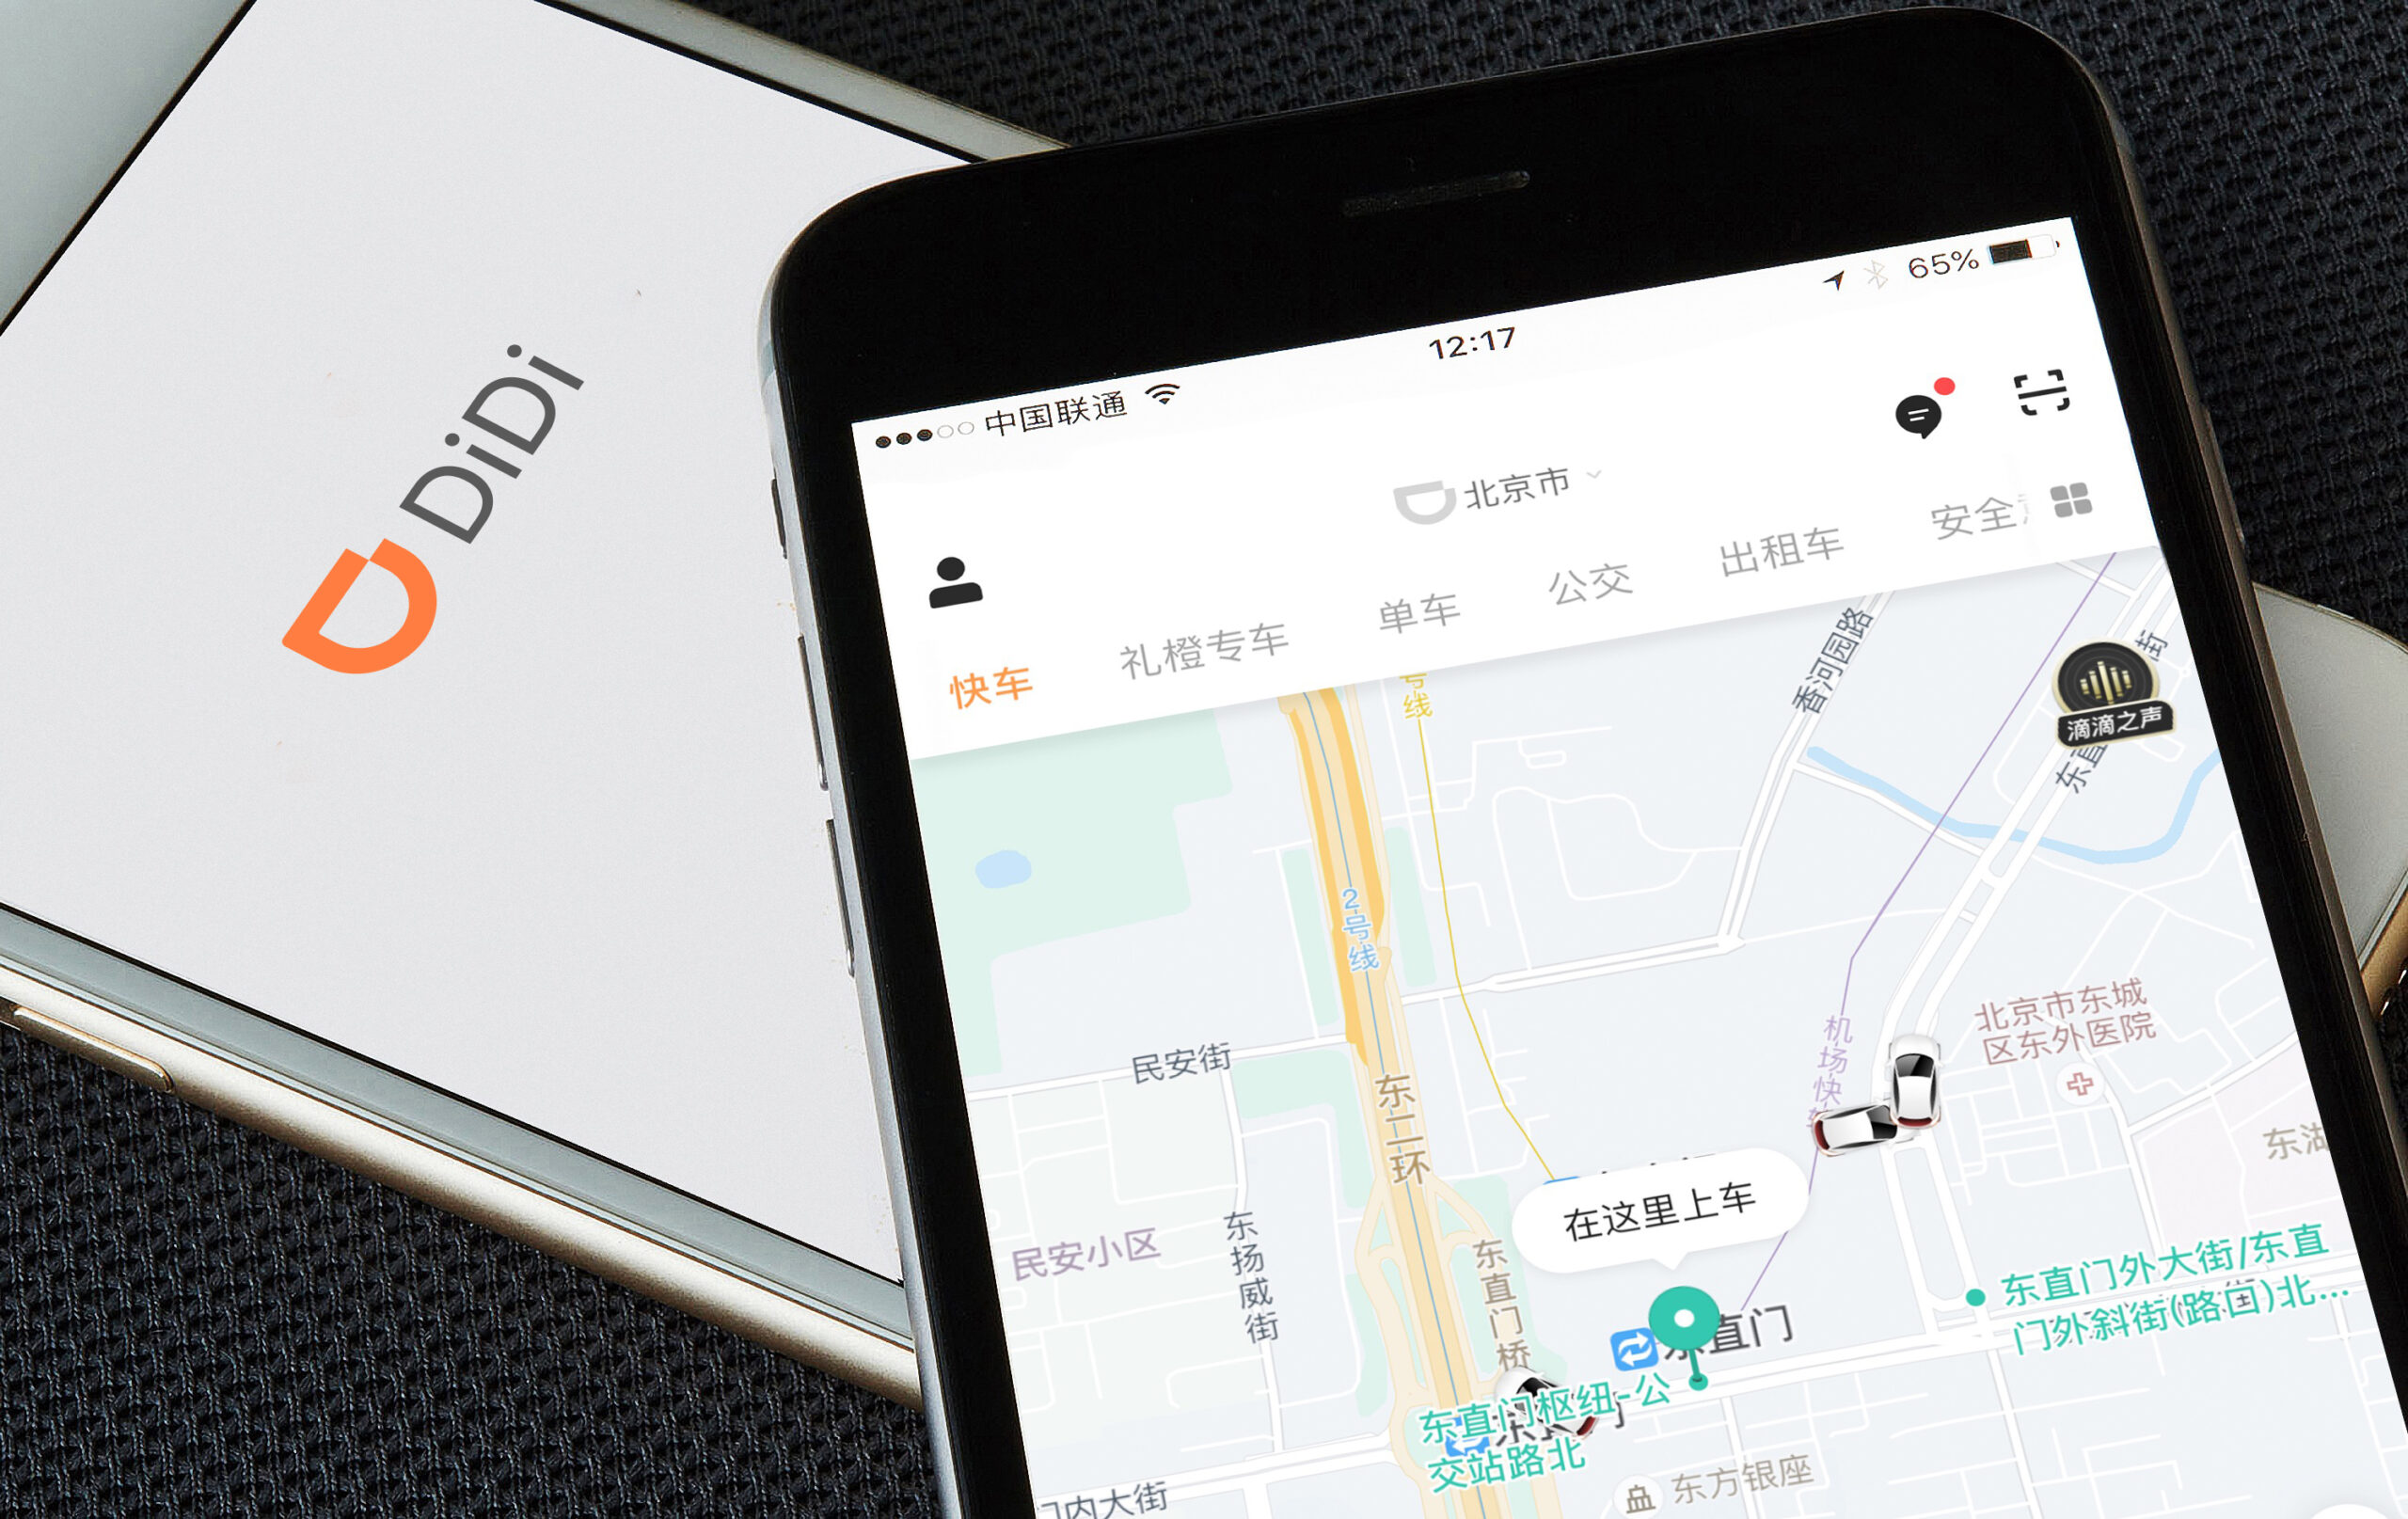 Didi and other tech companies continue to face China’s regulatory wrath